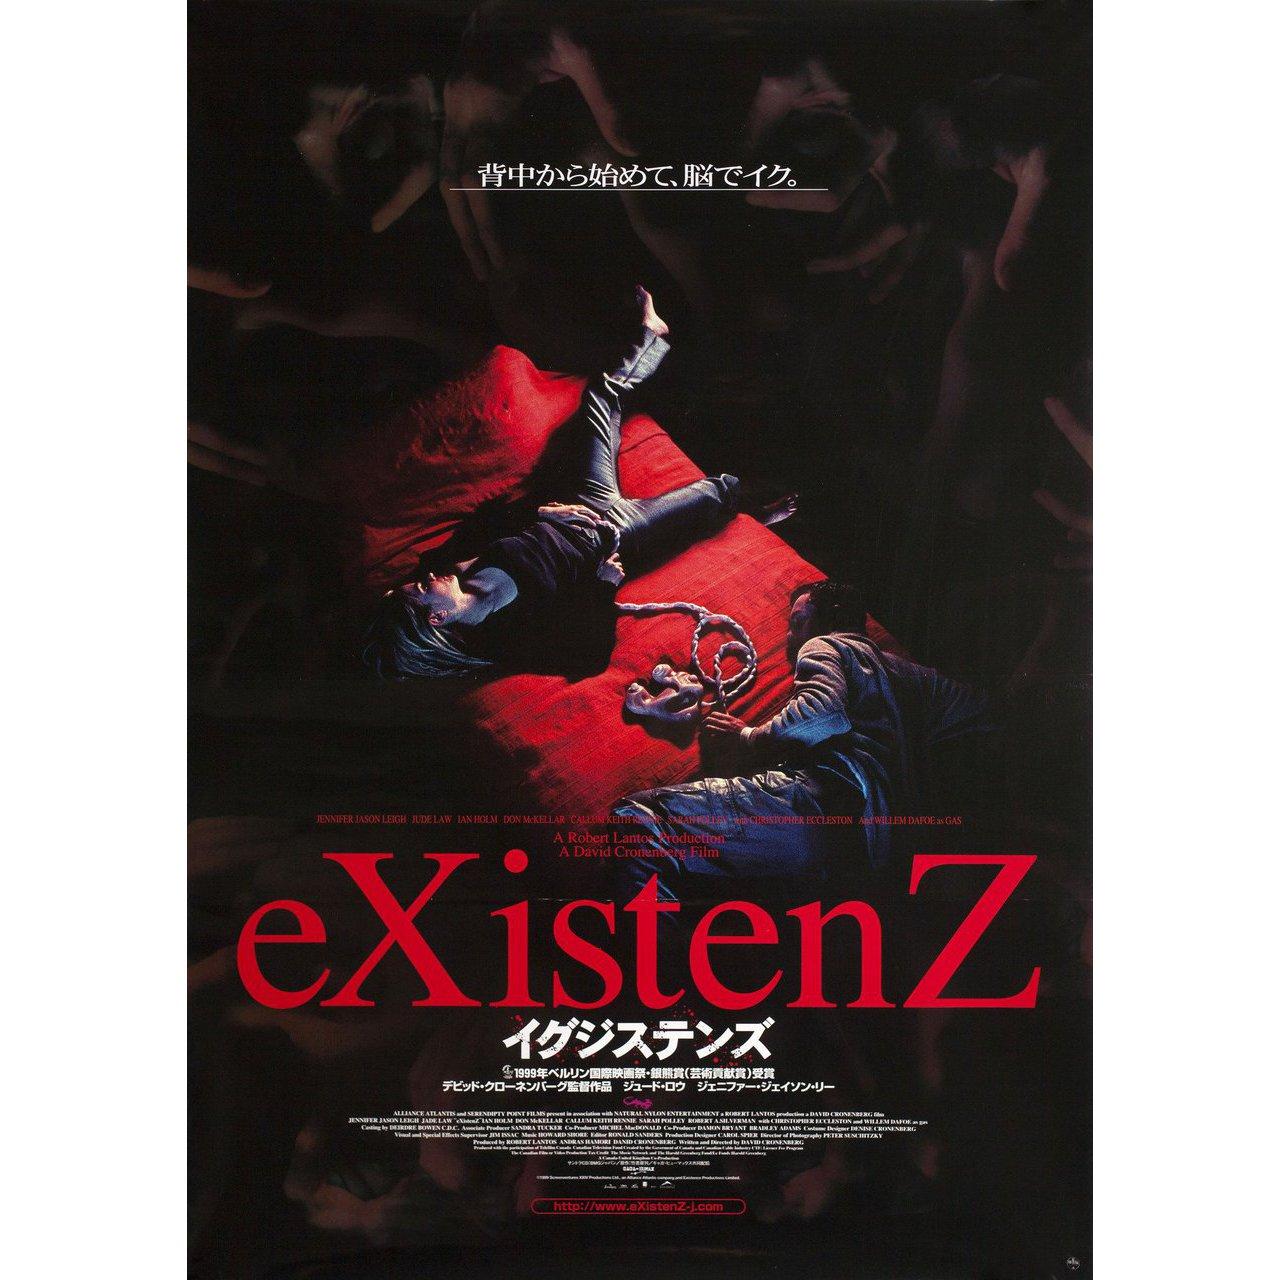 Original 1999 Japanese B2 poster for the film “eXistenZ” directed by David Cronenberg with Jennifer Jason Leigh / Jude Law / Ian Holm / Willem Dafoe. Fine condition, rolled. Please note: the size is stated in inches and the actual size can vary by